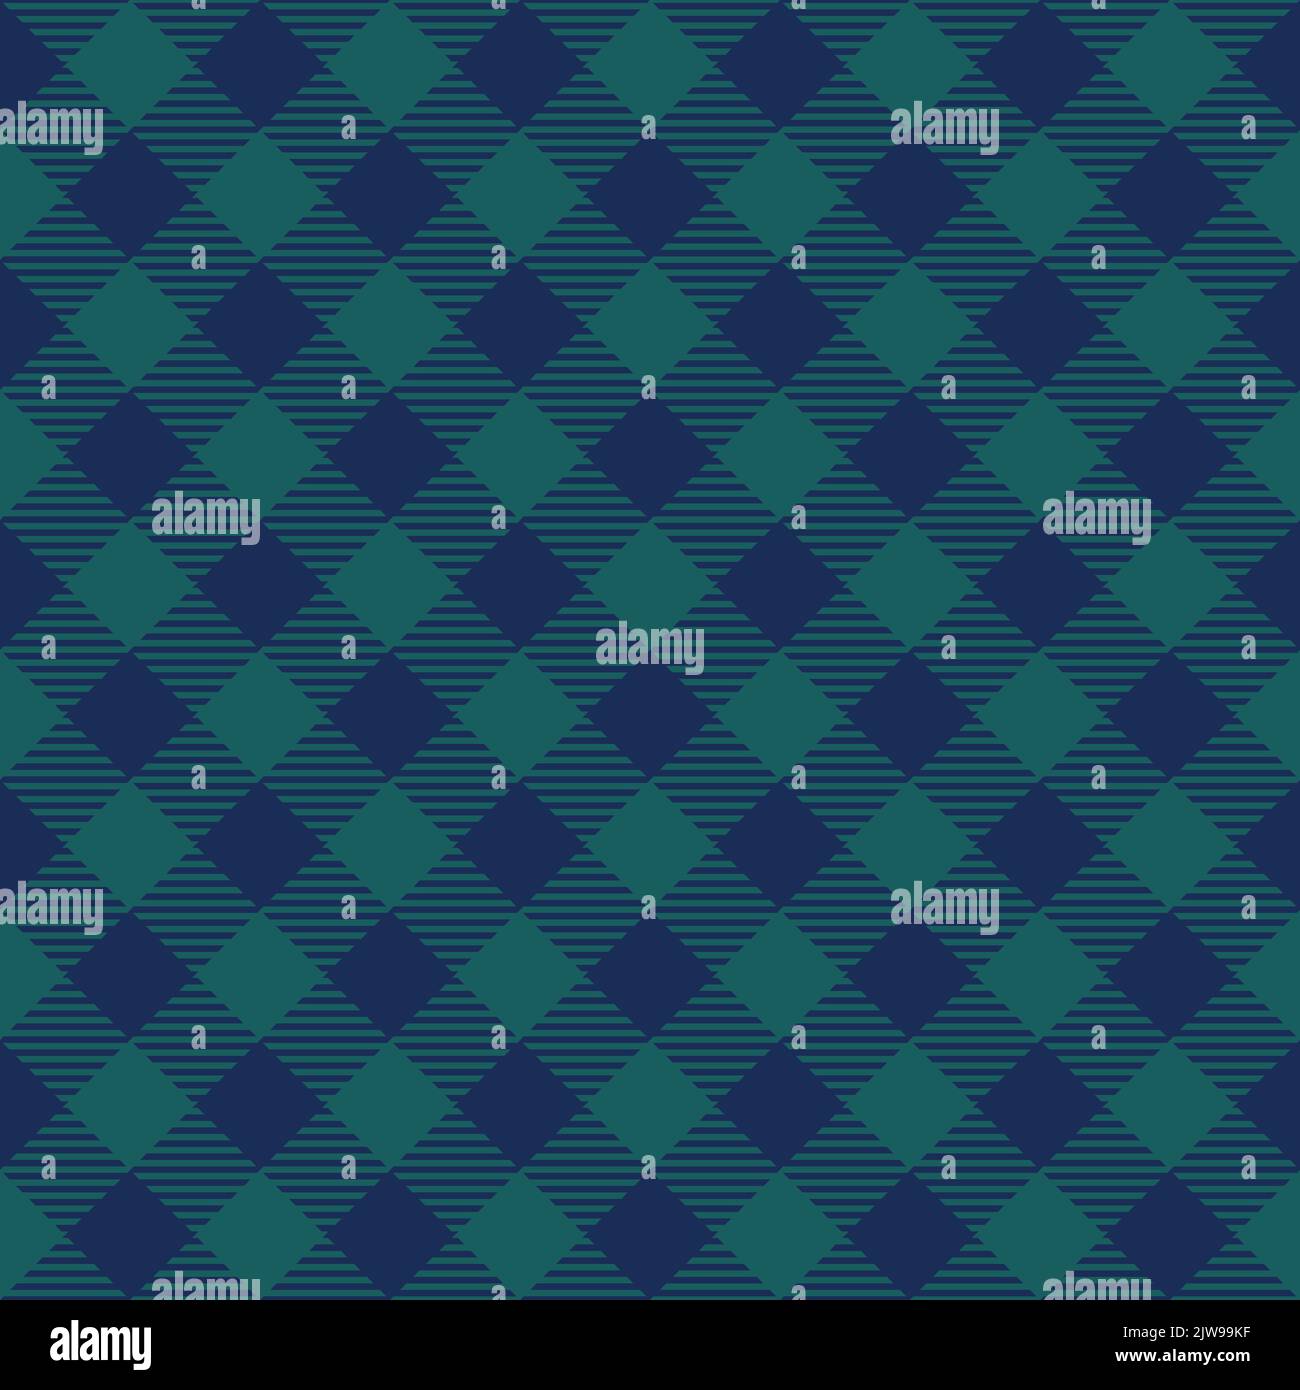 Plaid pattern vector. Check fabric texture. Seamless textile design for ...